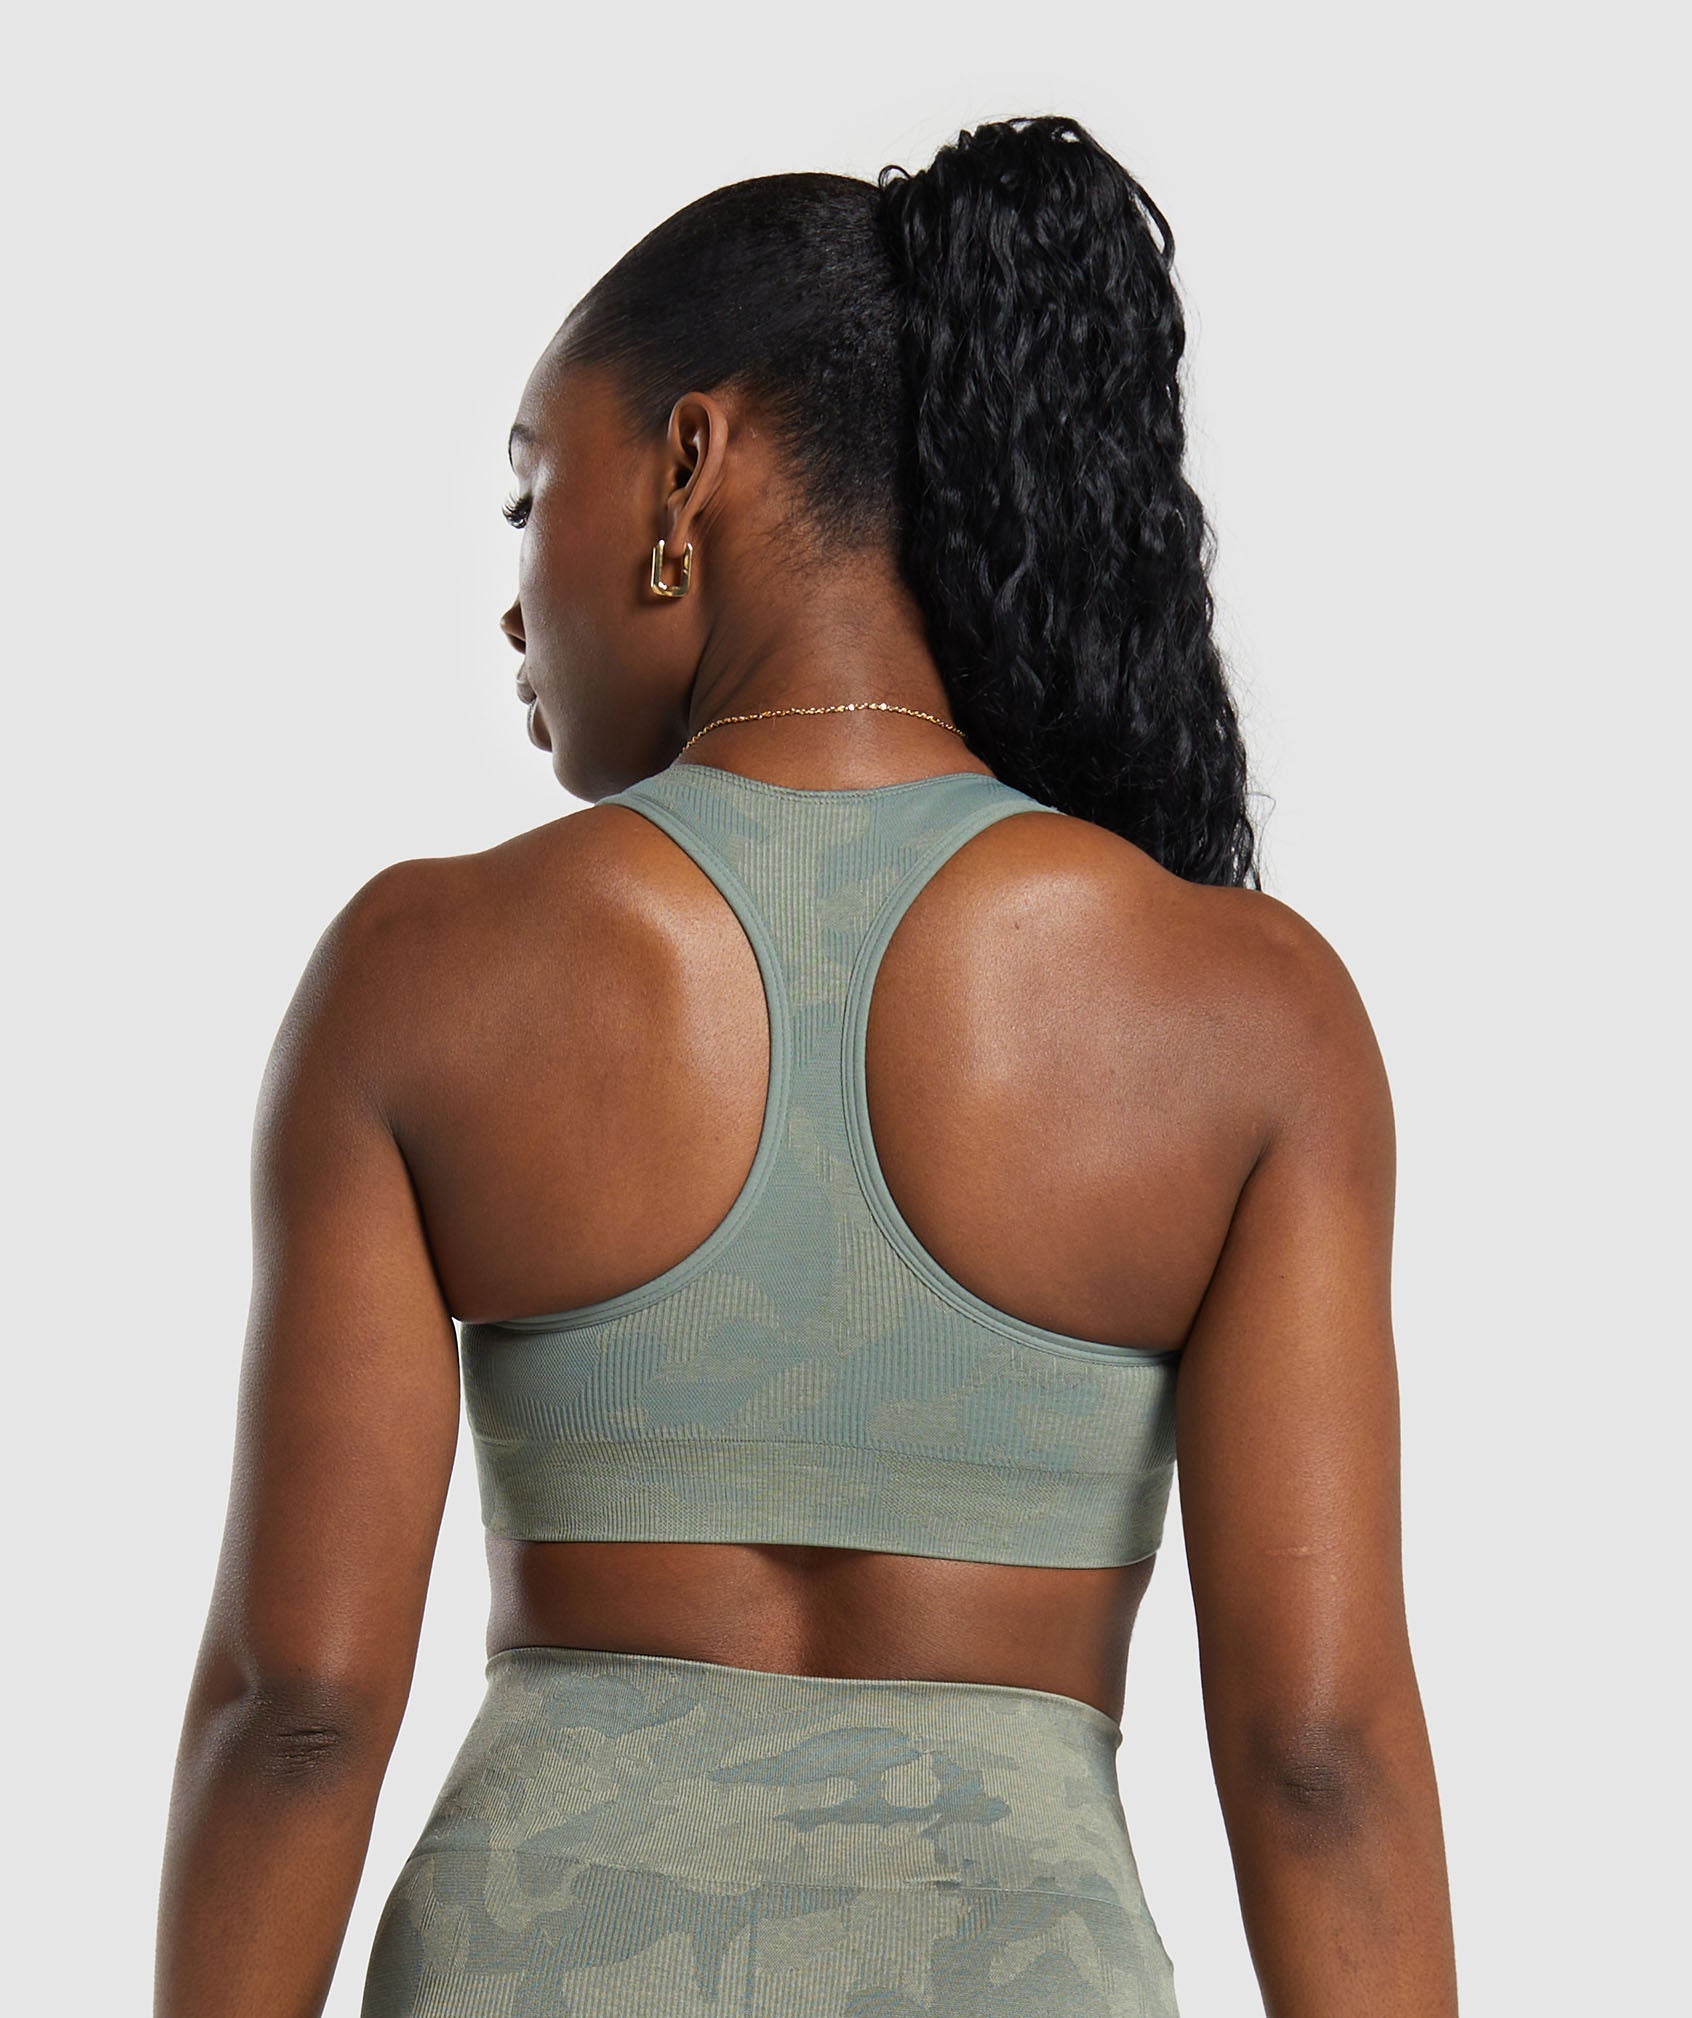 Nike Sports Bras S for sale